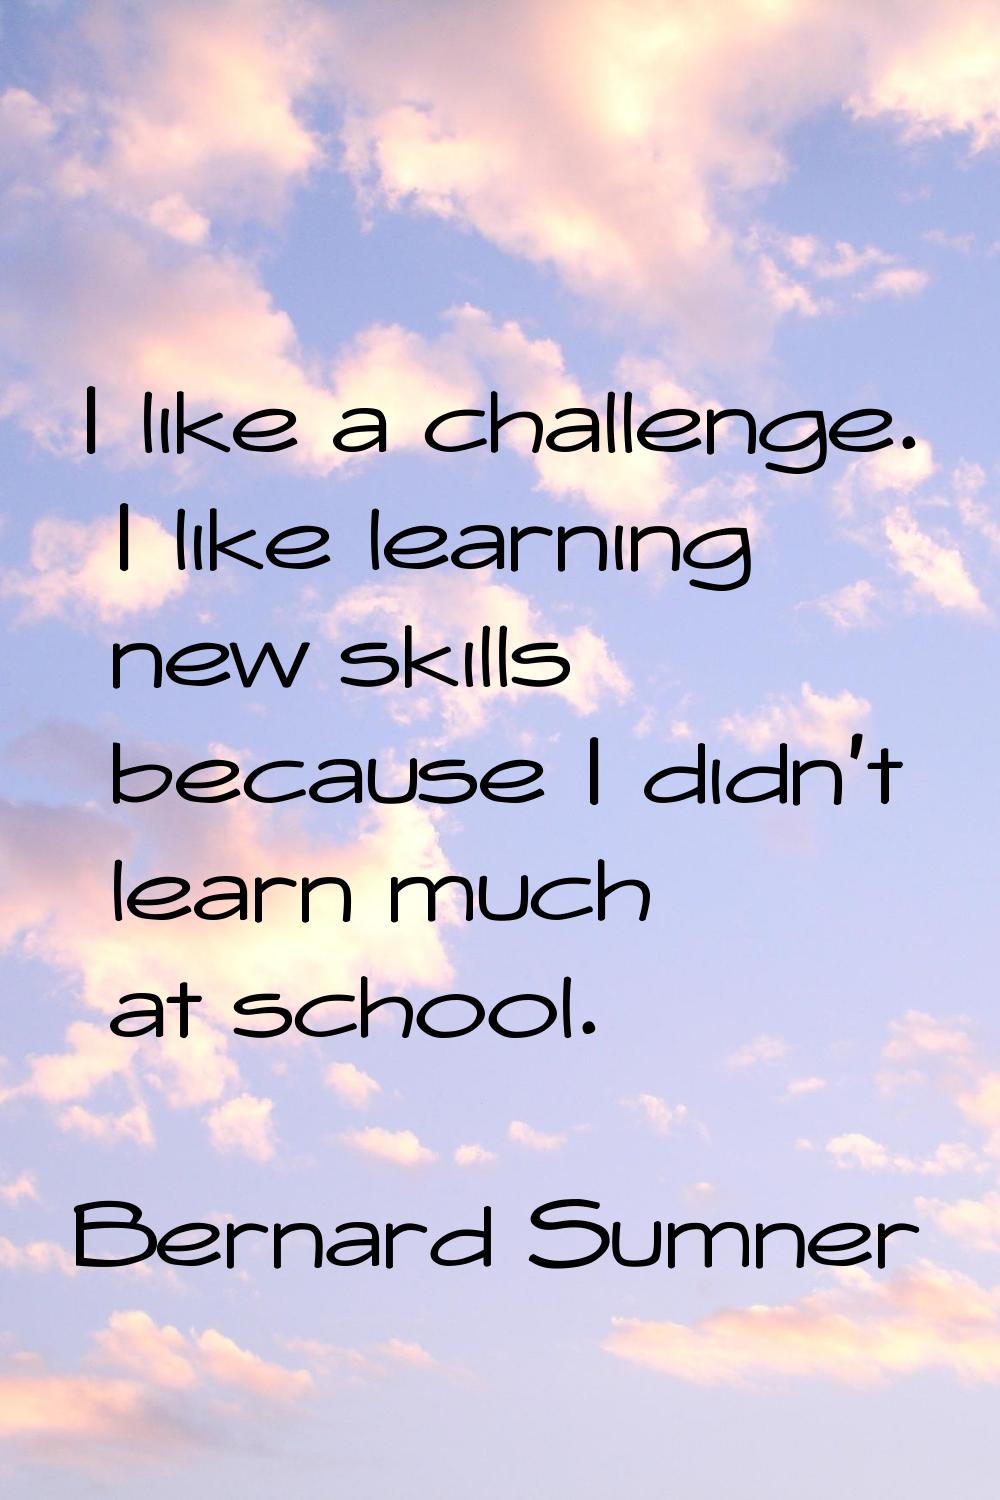 I like a challenge. I like learning new skills because I didn't learn much at school.